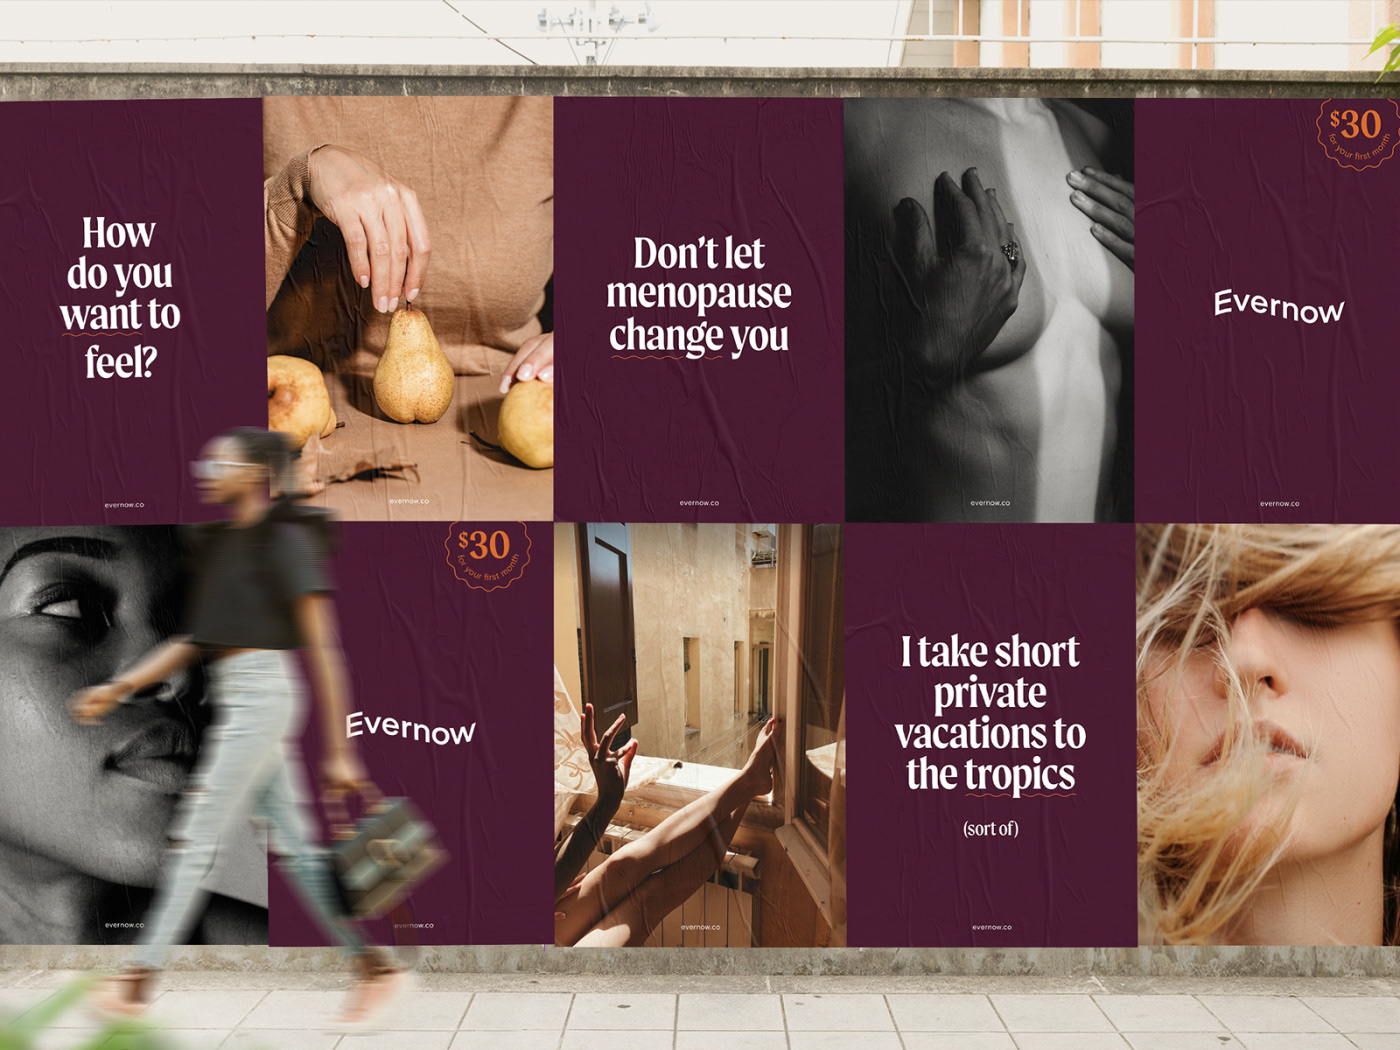 Mockup of outdoor ads with a woman walking in the front.